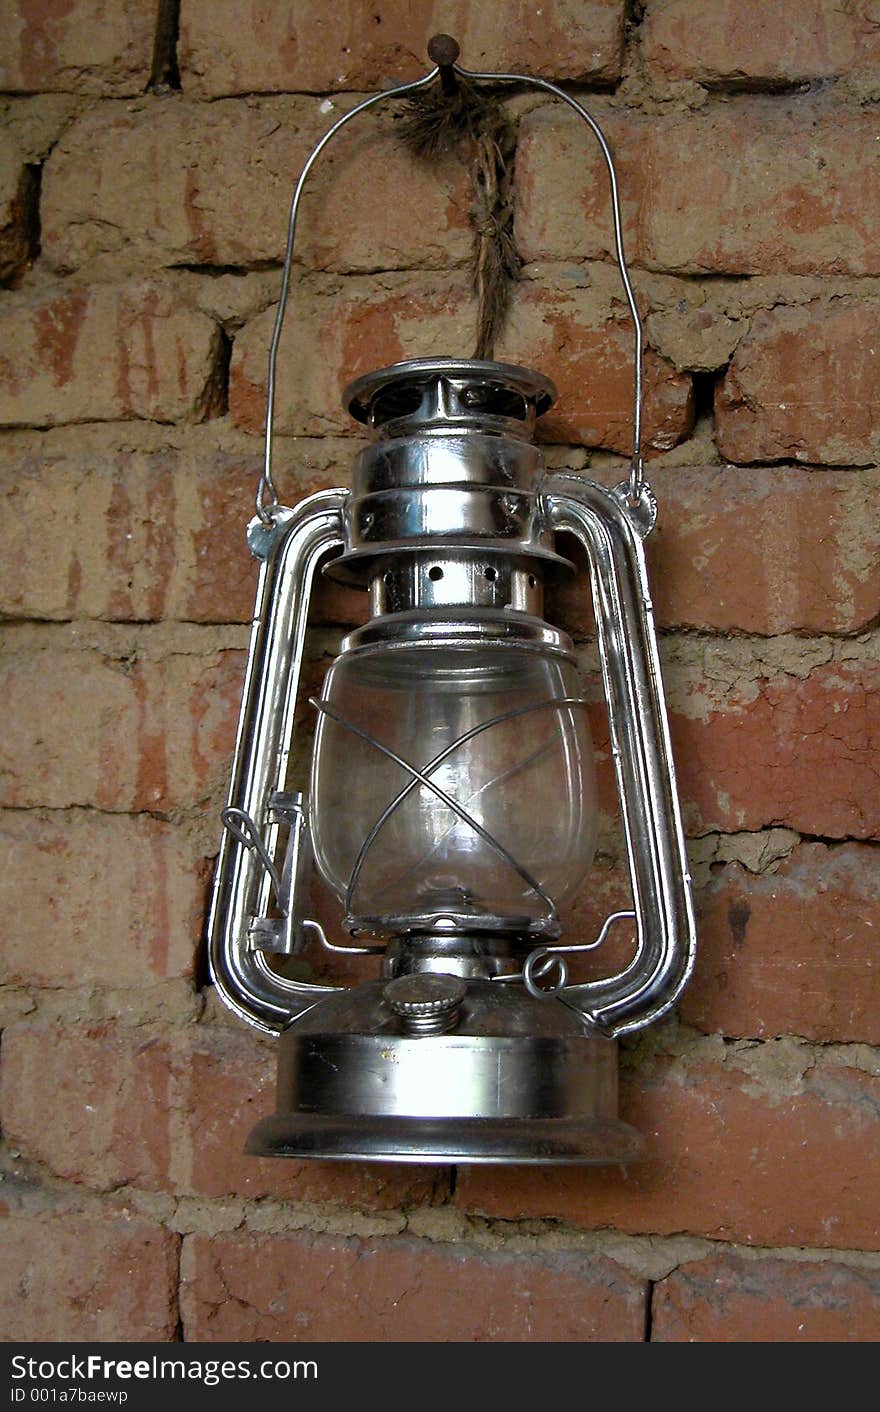 Vintage petrol lamp from my grandmothers house